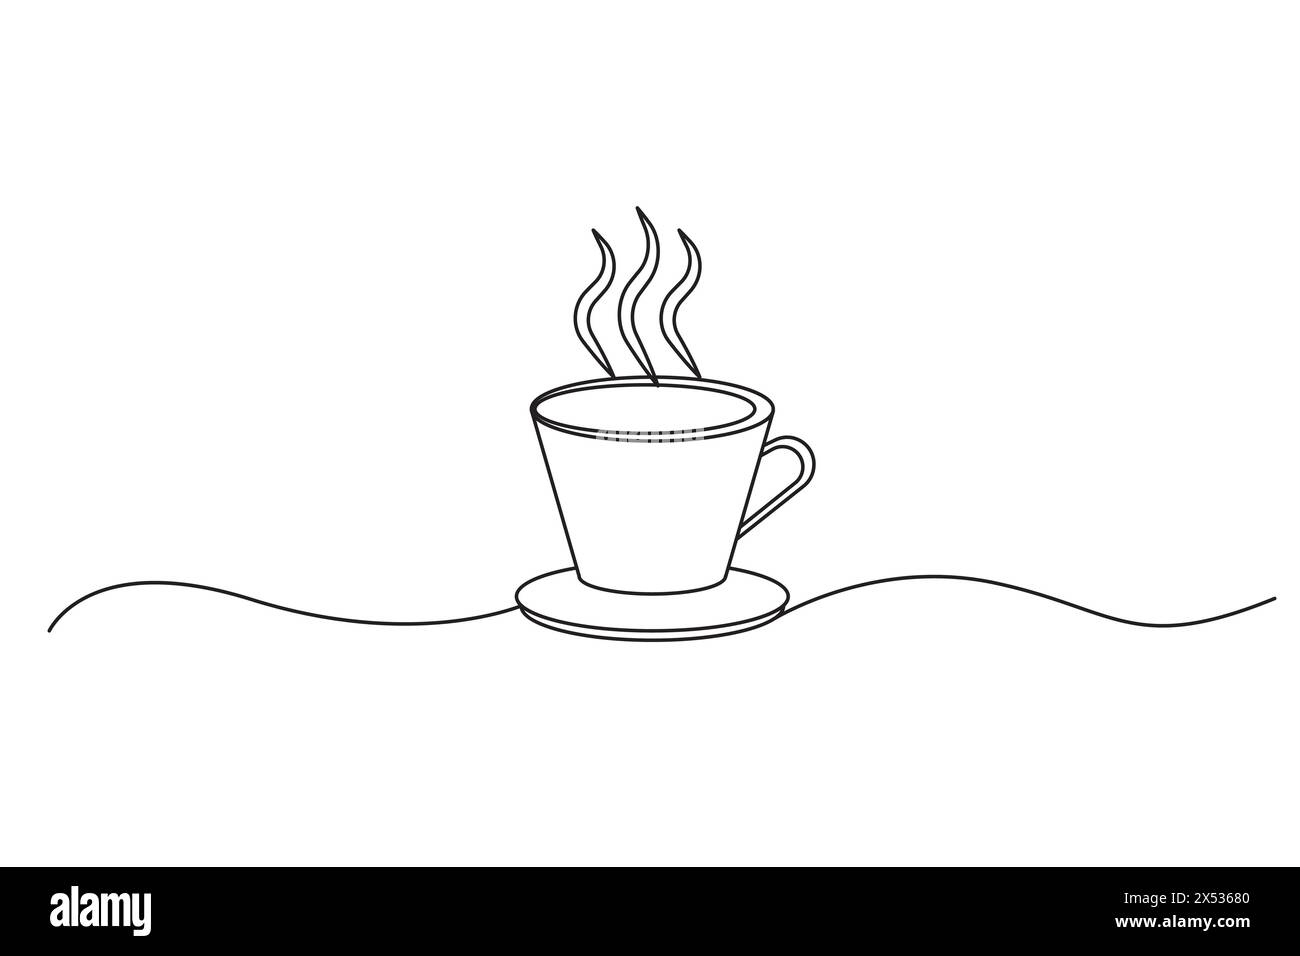 Steaming coffee cup. Continuous line drawing. Minimalist art. Stock Vector